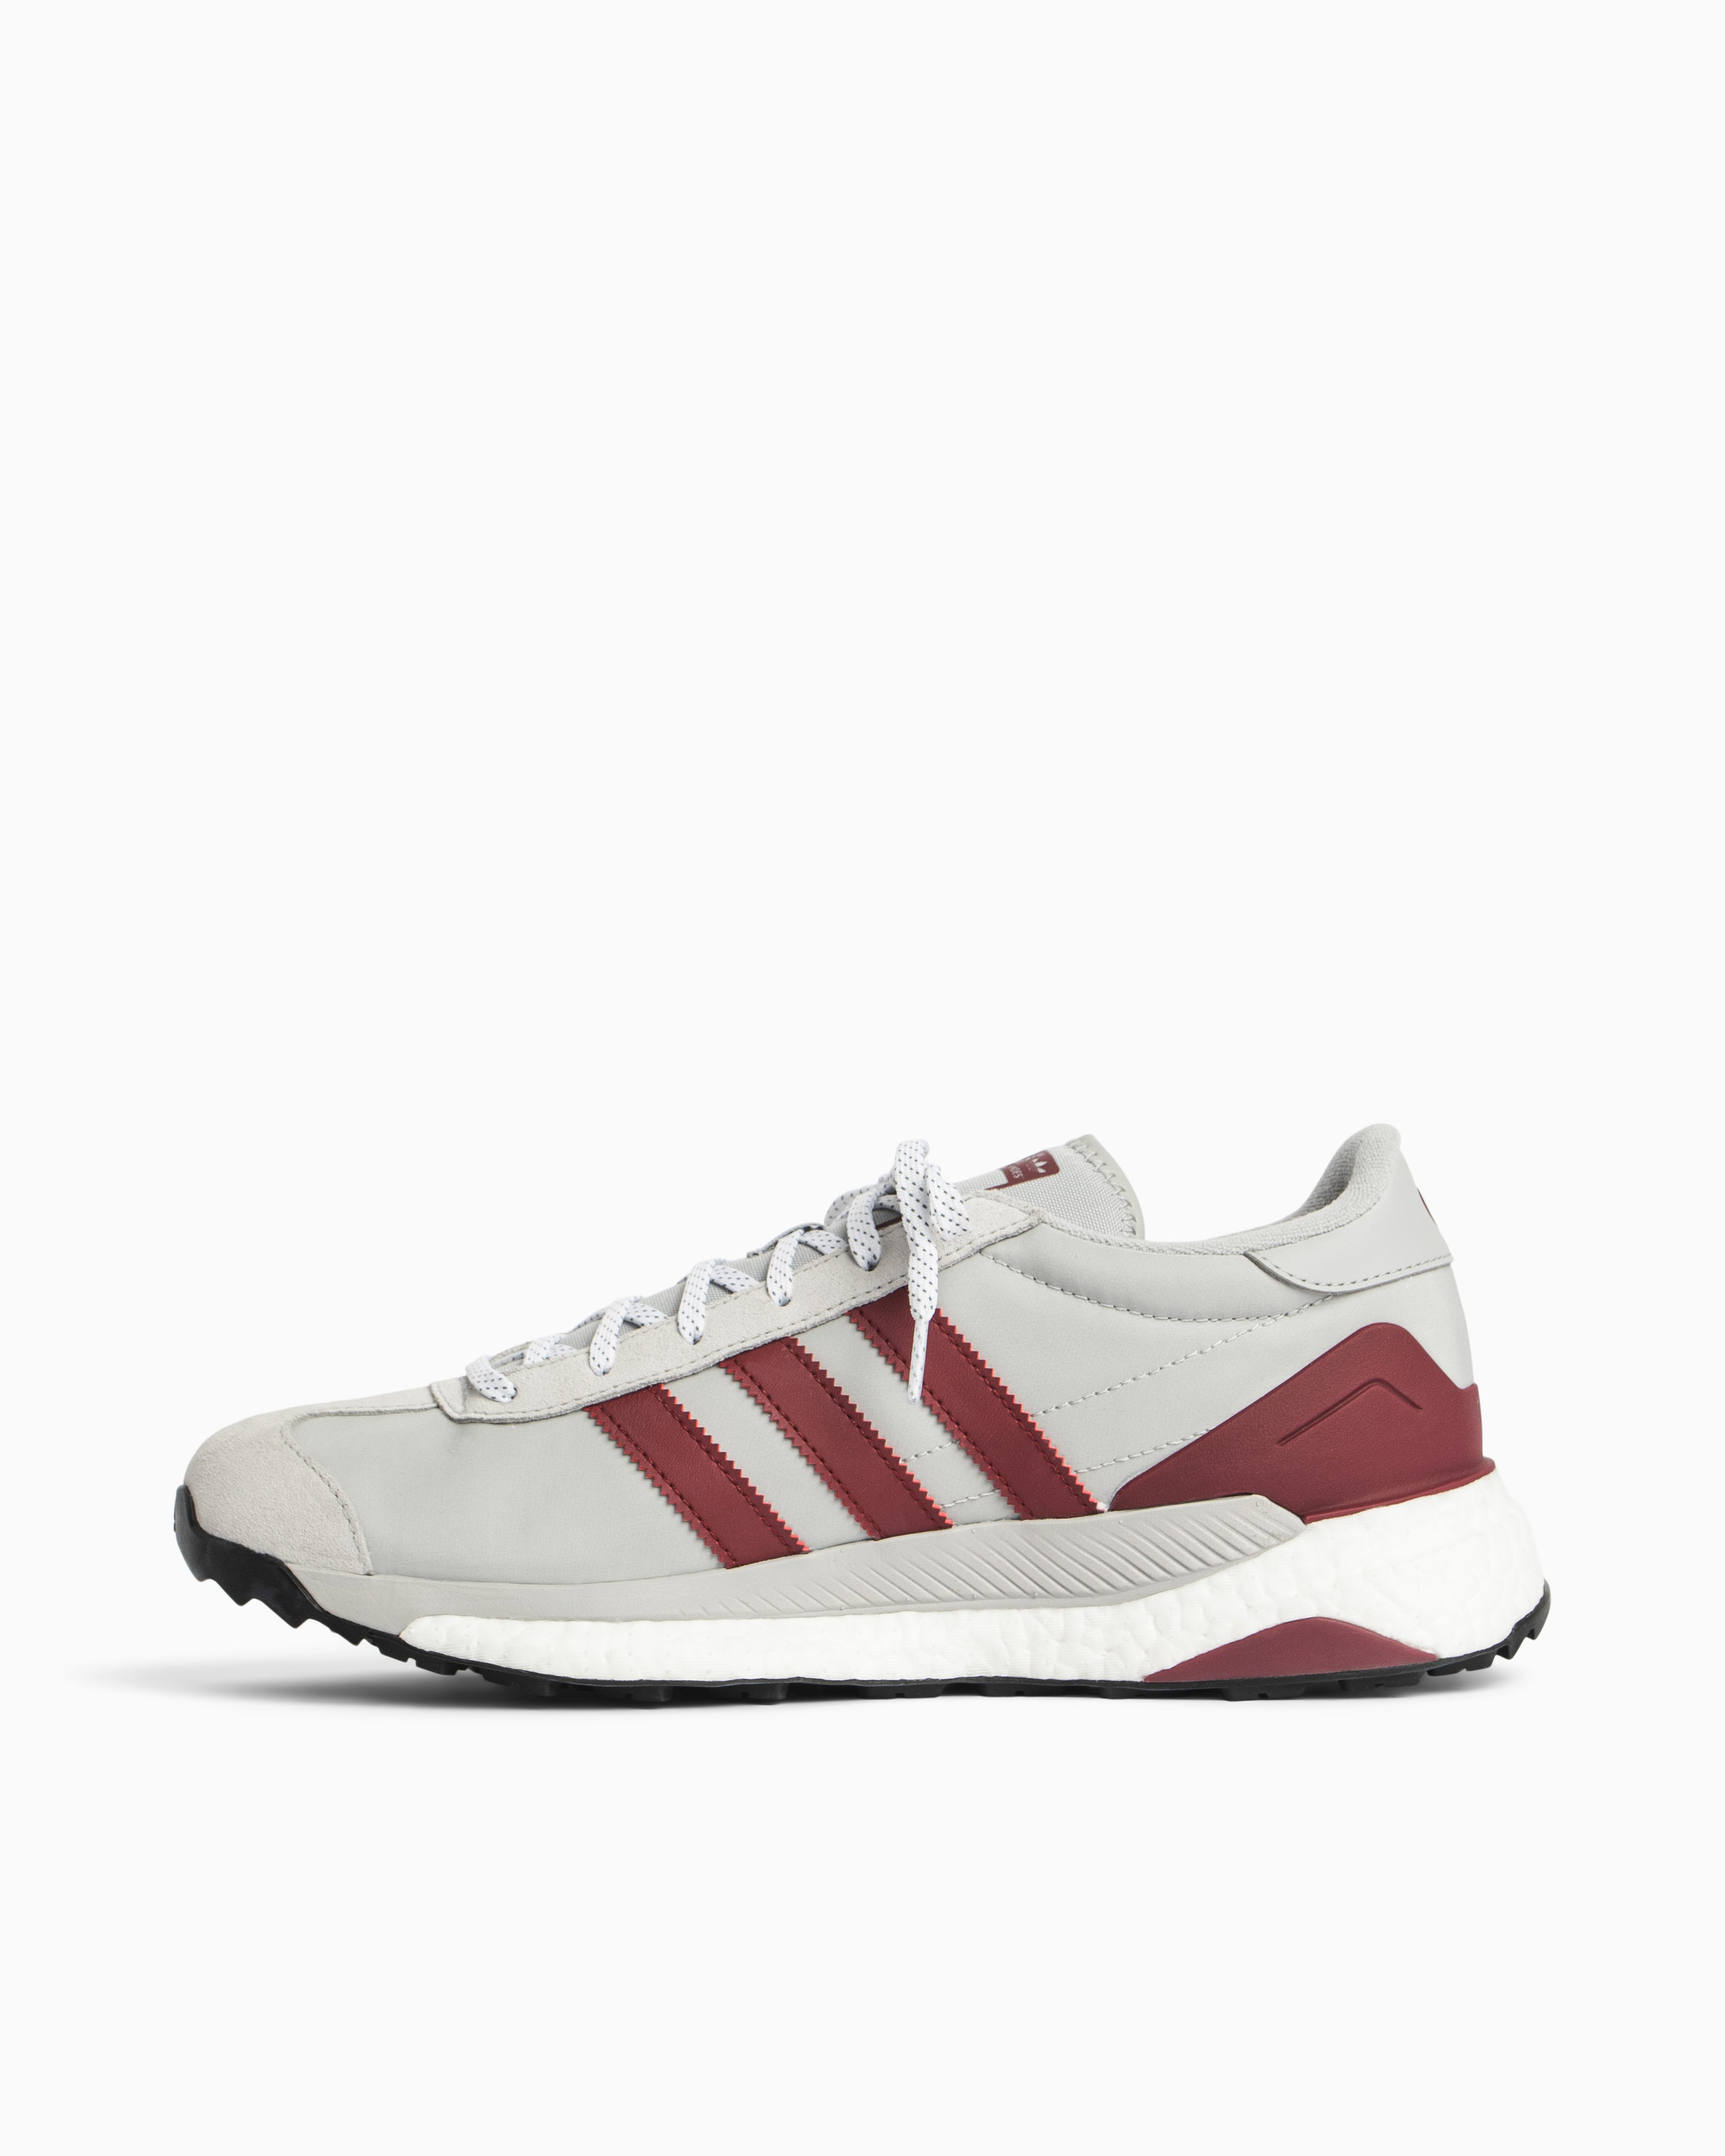 Country HM by Adidas Consortium